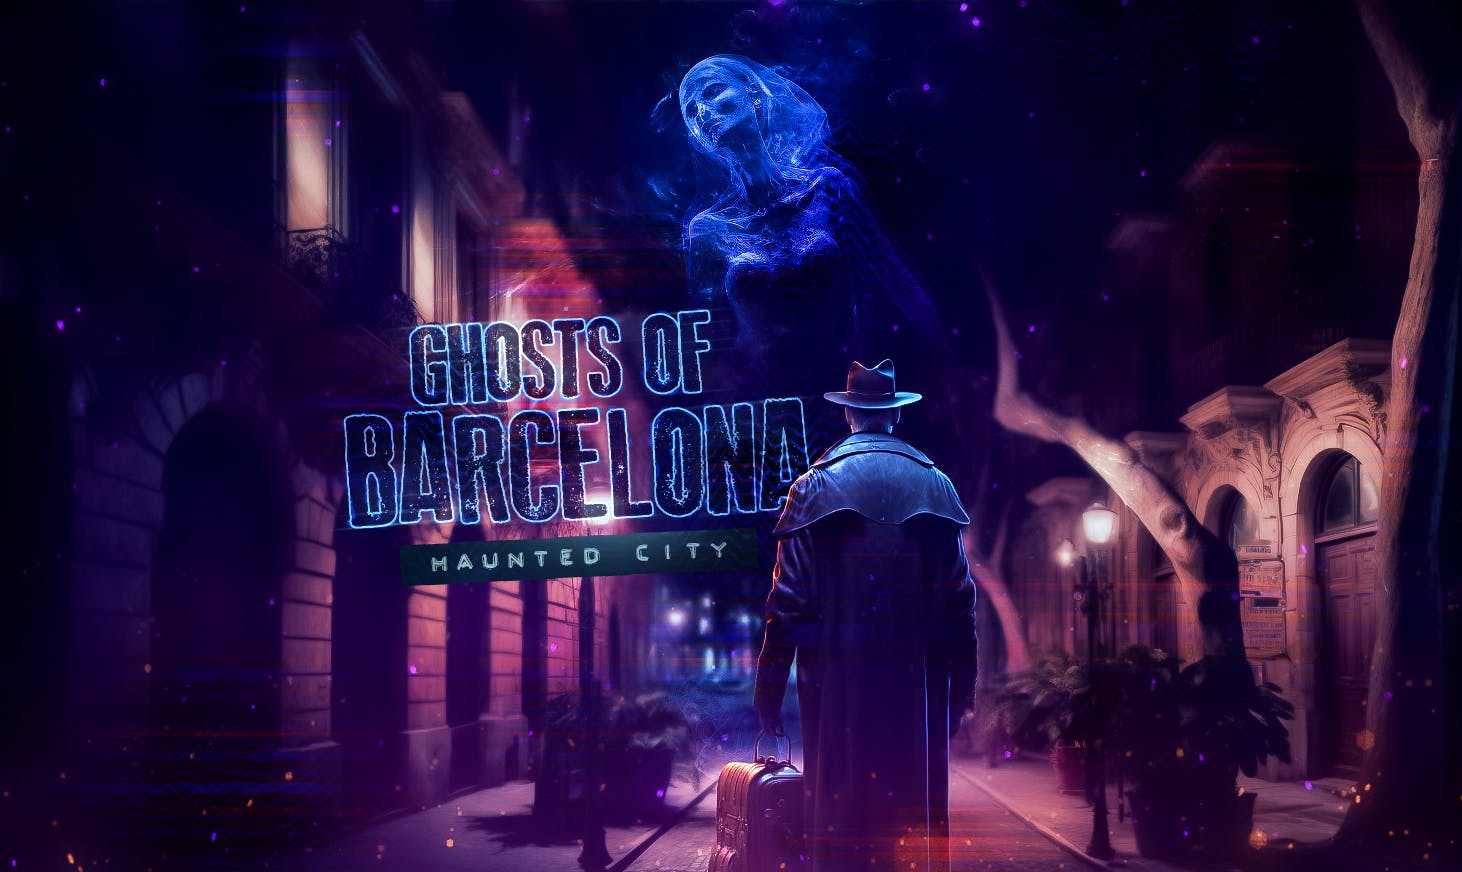 Ghosts of Barcelona exploration game and tour